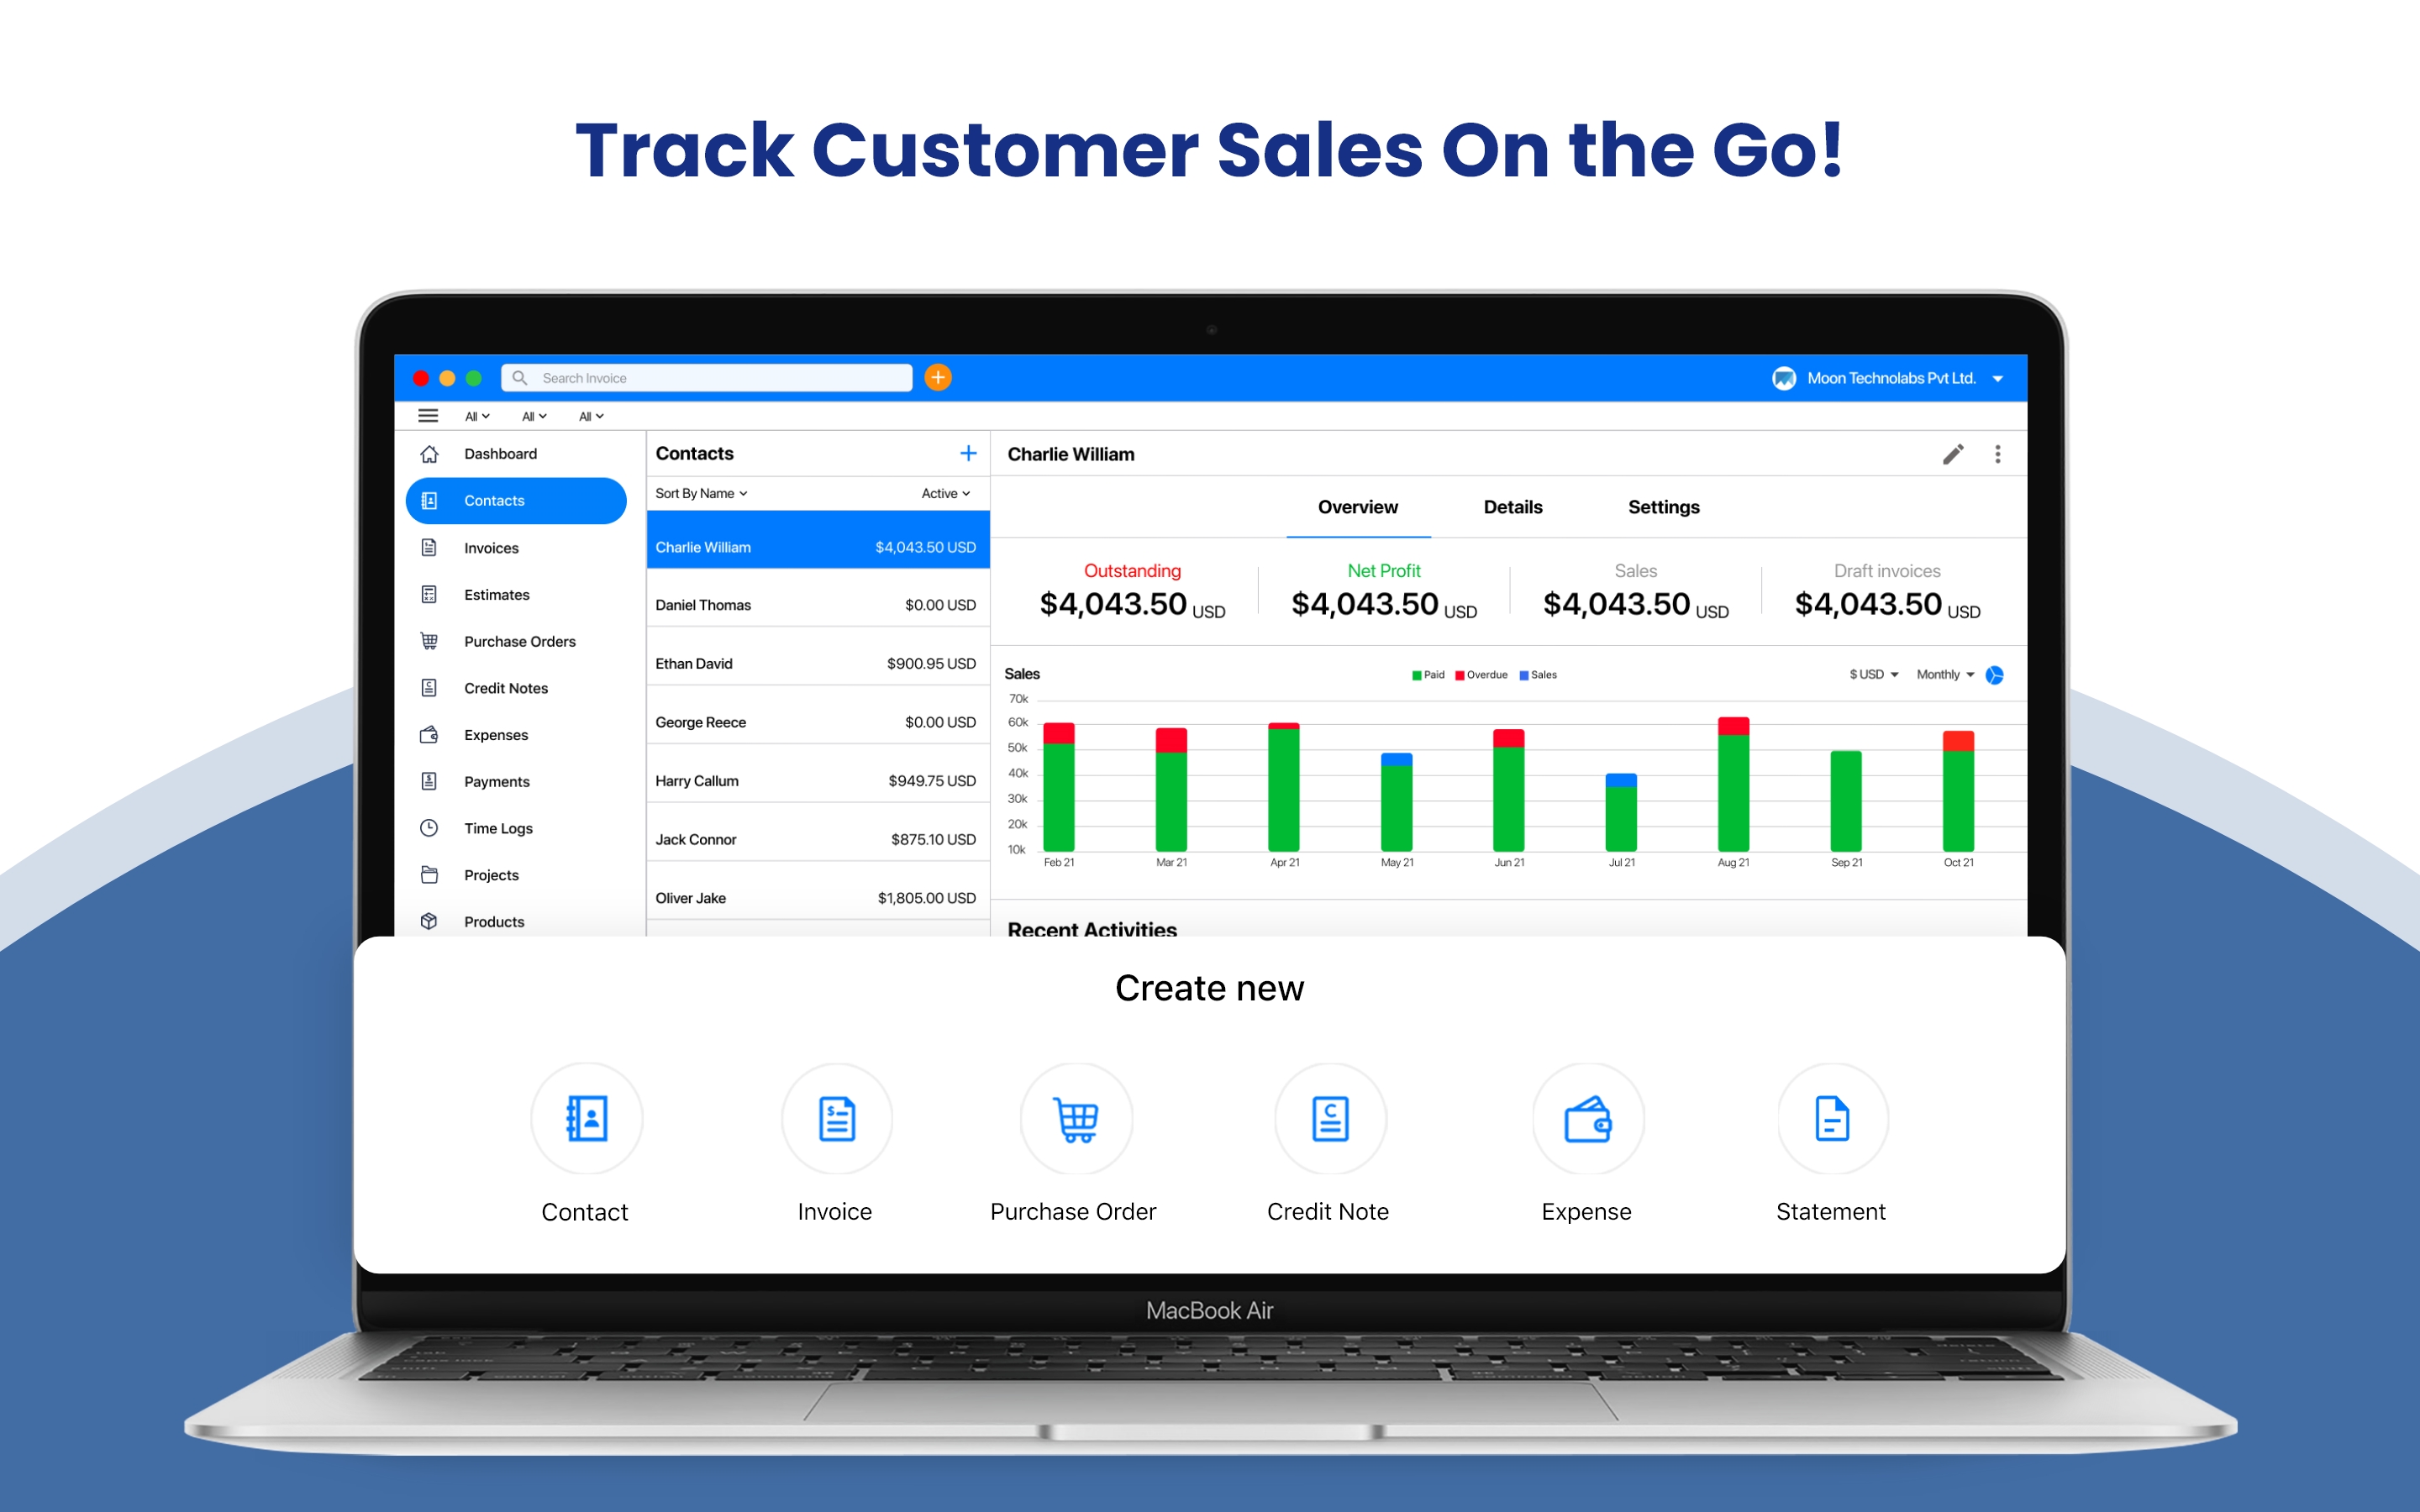 Track Customer Sales On the Go!